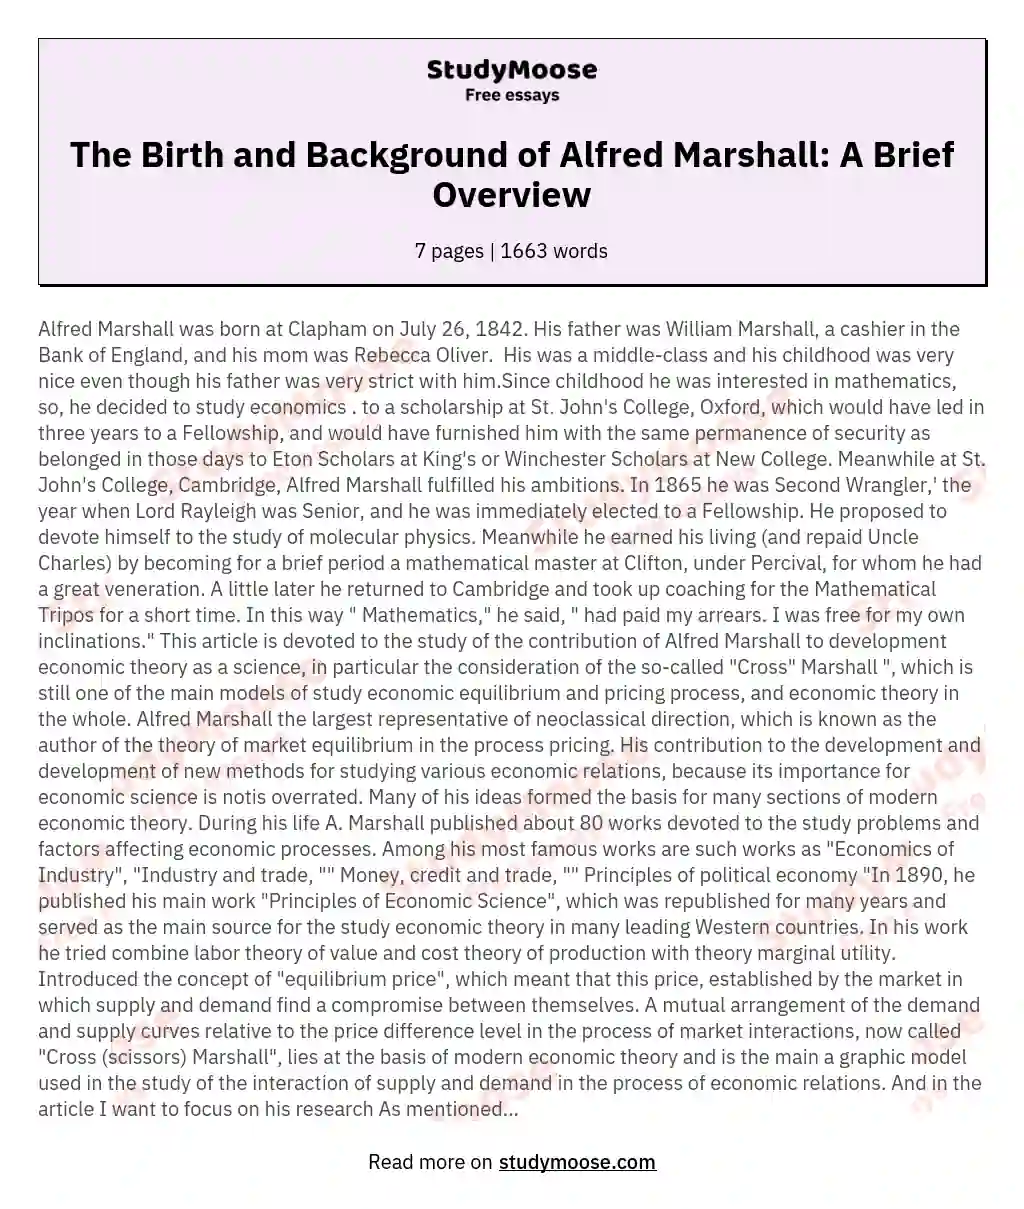 The Birth and Background of Alfred Marshall: A Brief Overview essay